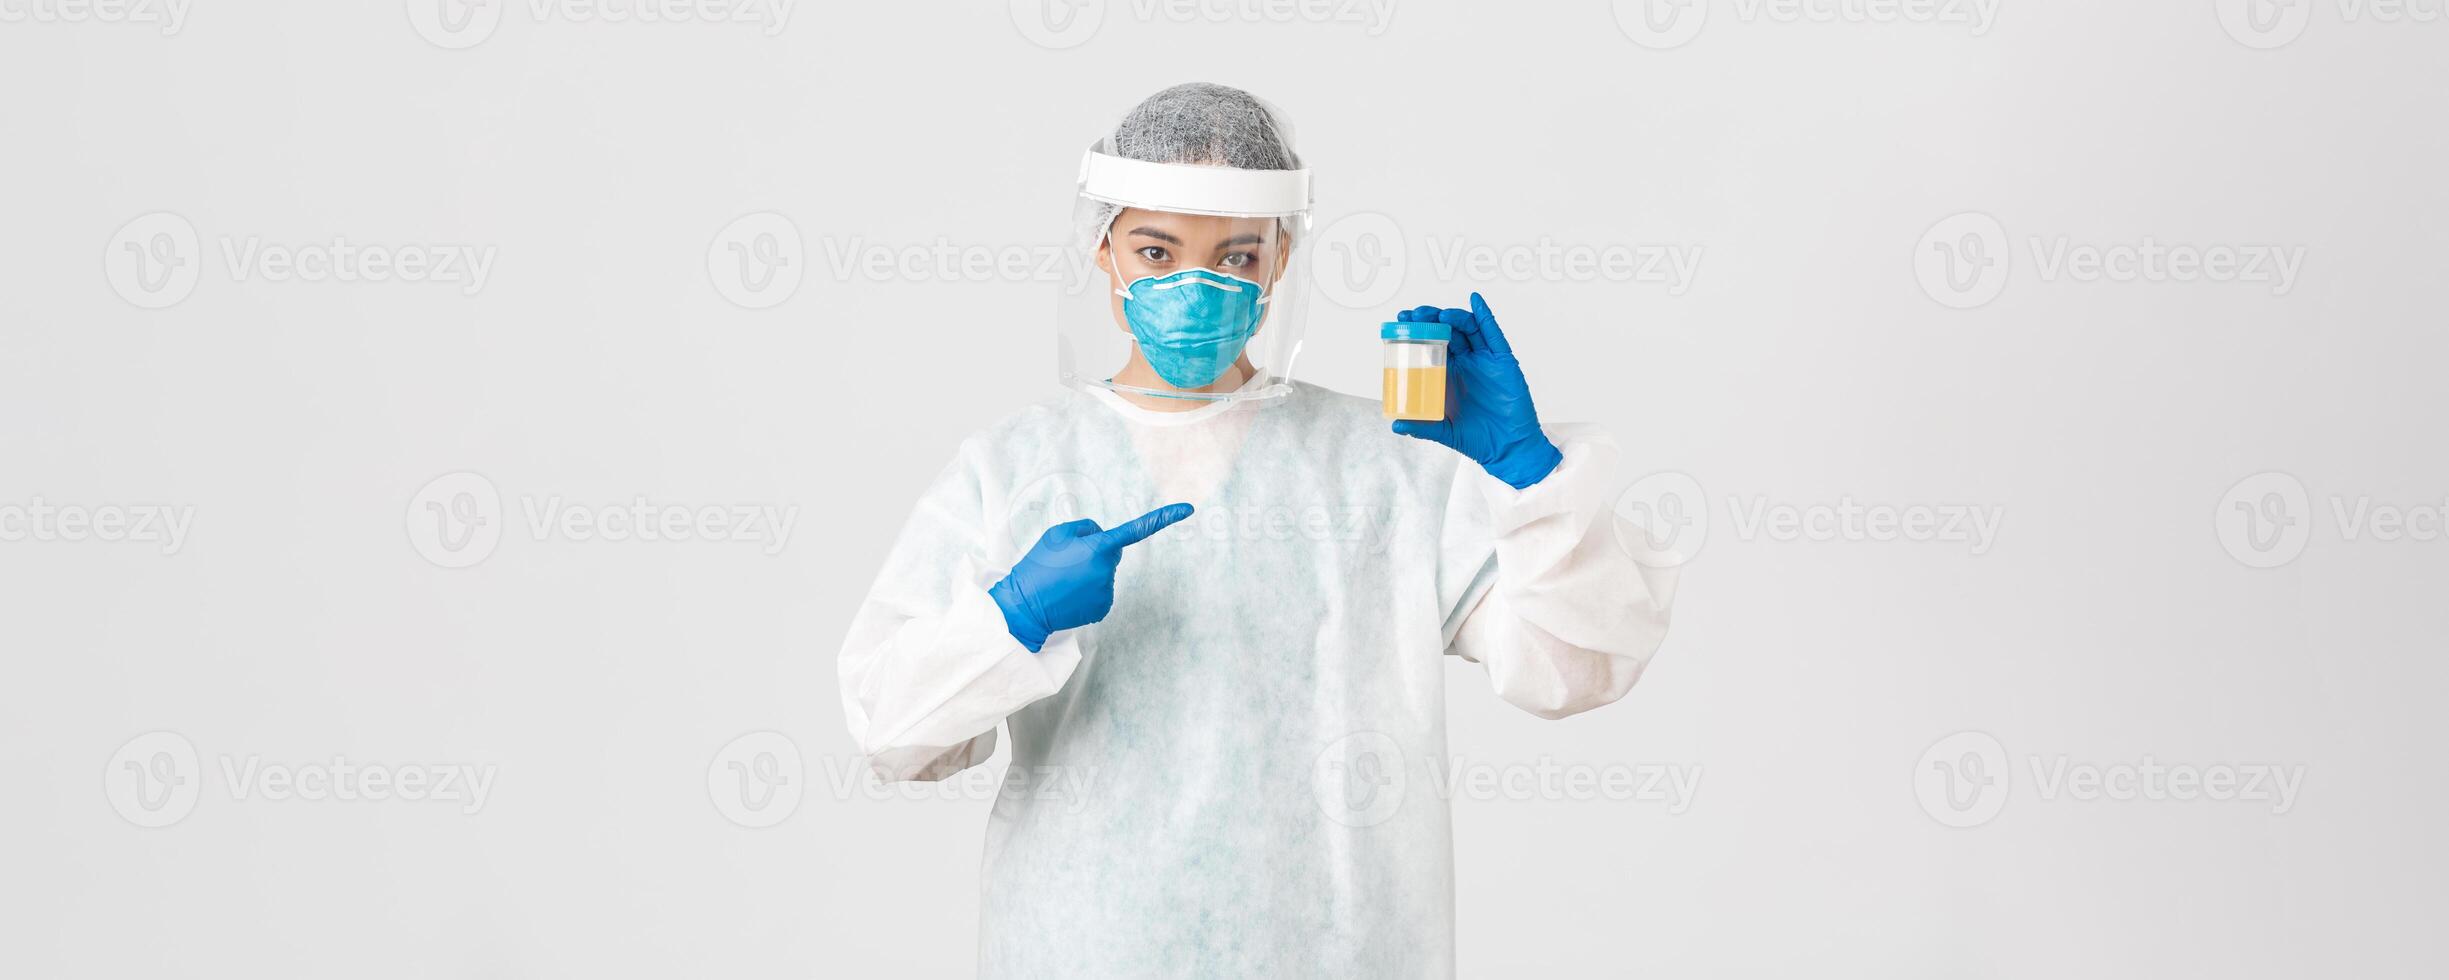 Covid-19, coronavirus disease, healthcare workers concept. Side view of serious-looking tech lab employee, researcher in personal protective equipment, pointing at urine analyze photo